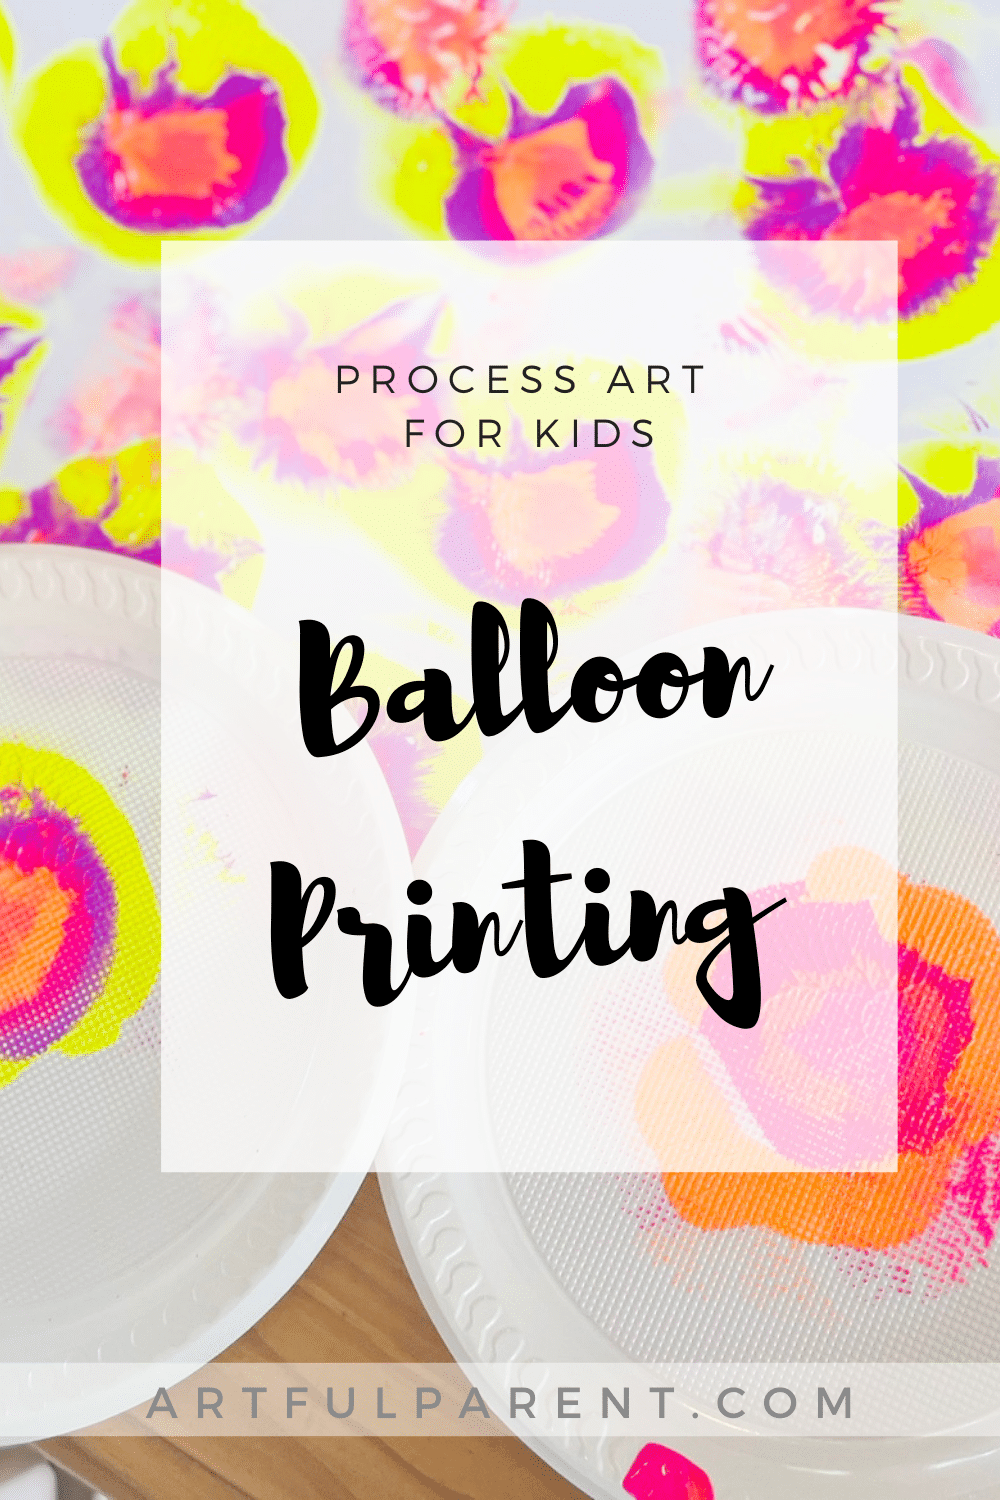 How to Do Balloon Printing for Kids